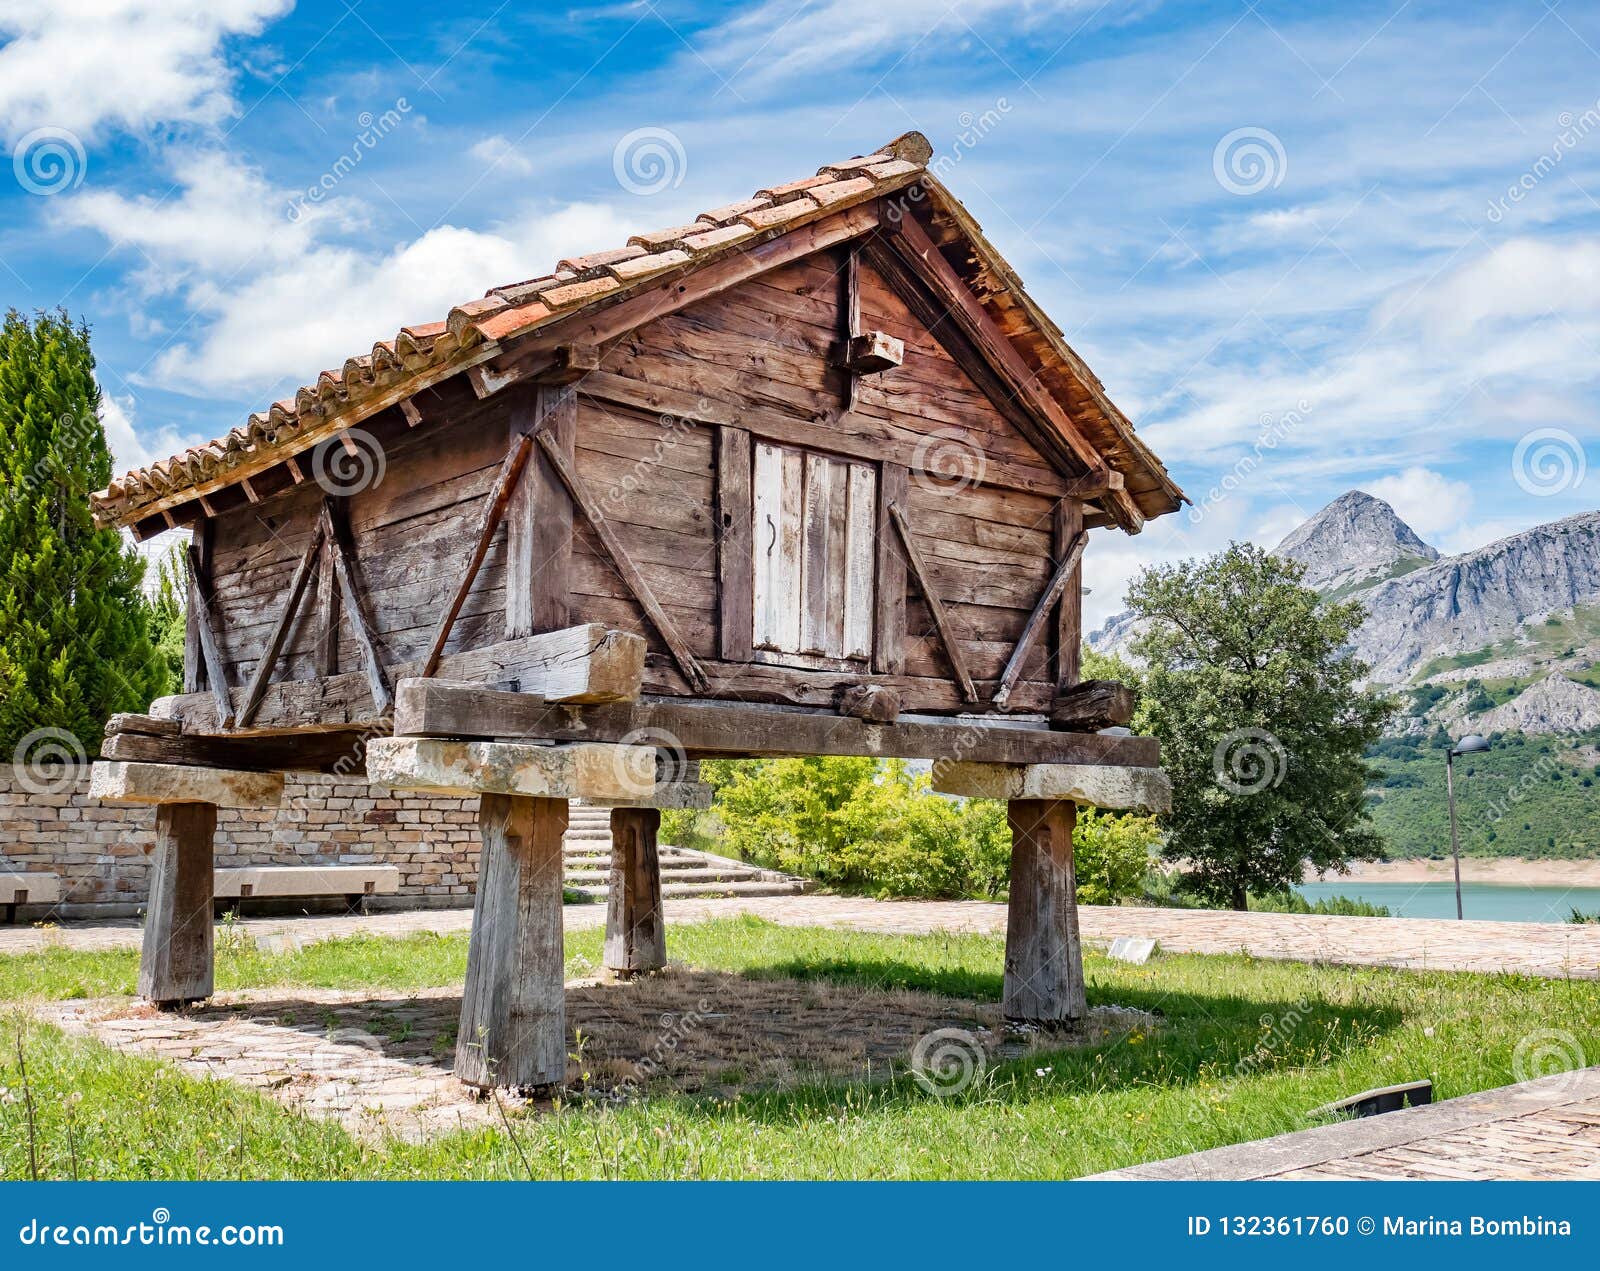 old wooden horreo, typical rural construction in spain.